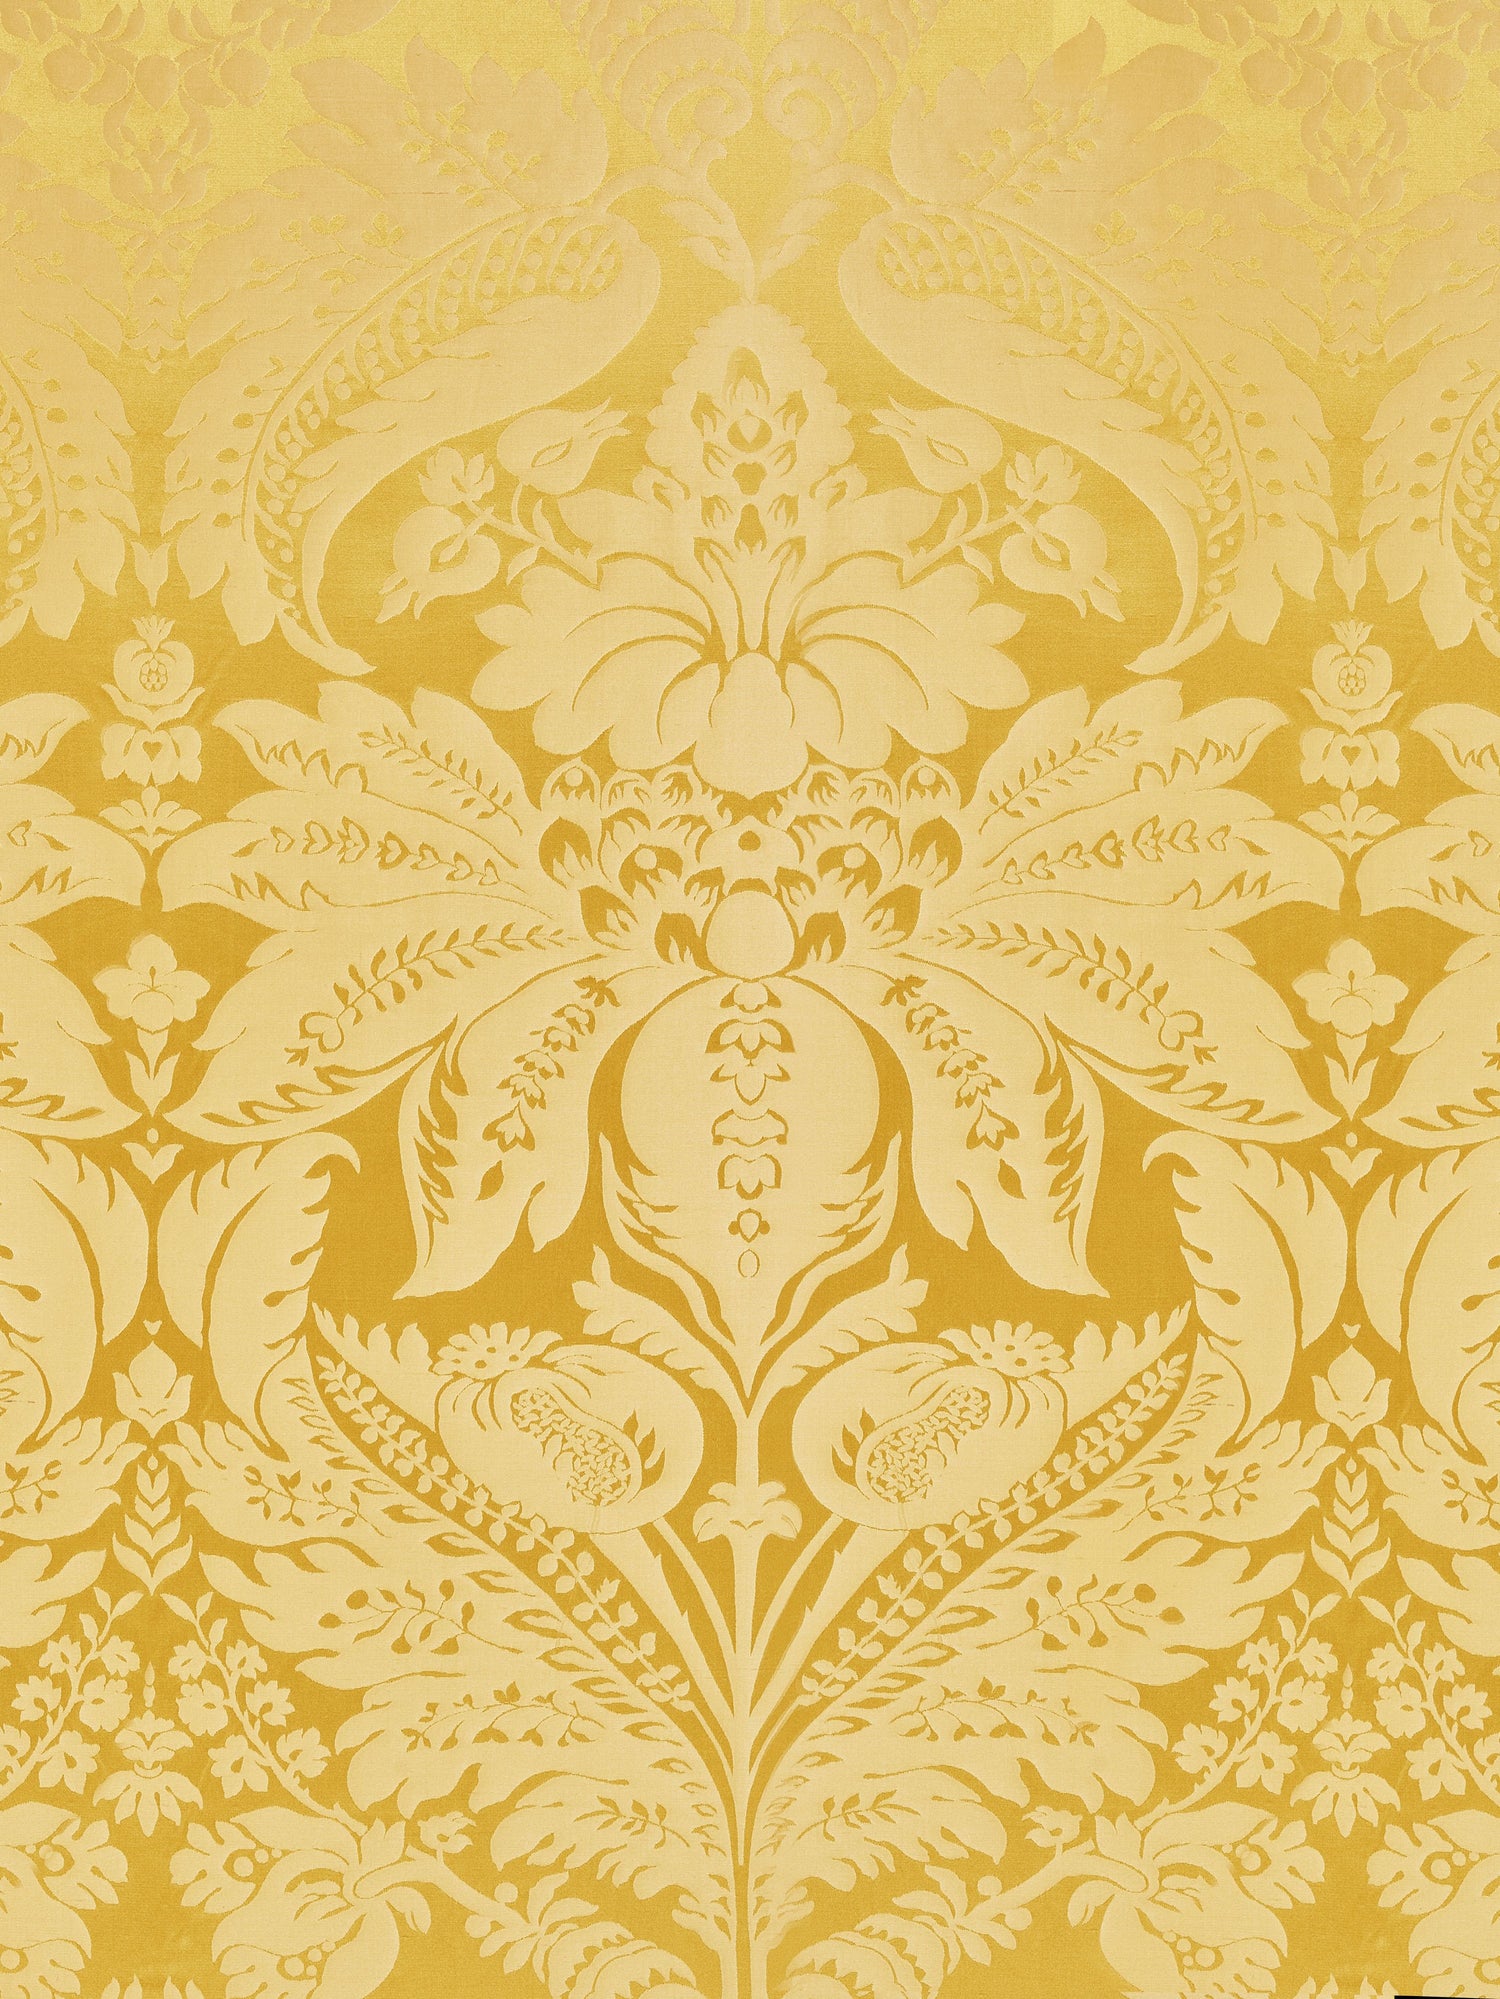 Newport Damask fabric in vermeil color - pattern number SC 000220100M - by Scalamandre in the Scalamandre Fabrics Book 1 collection